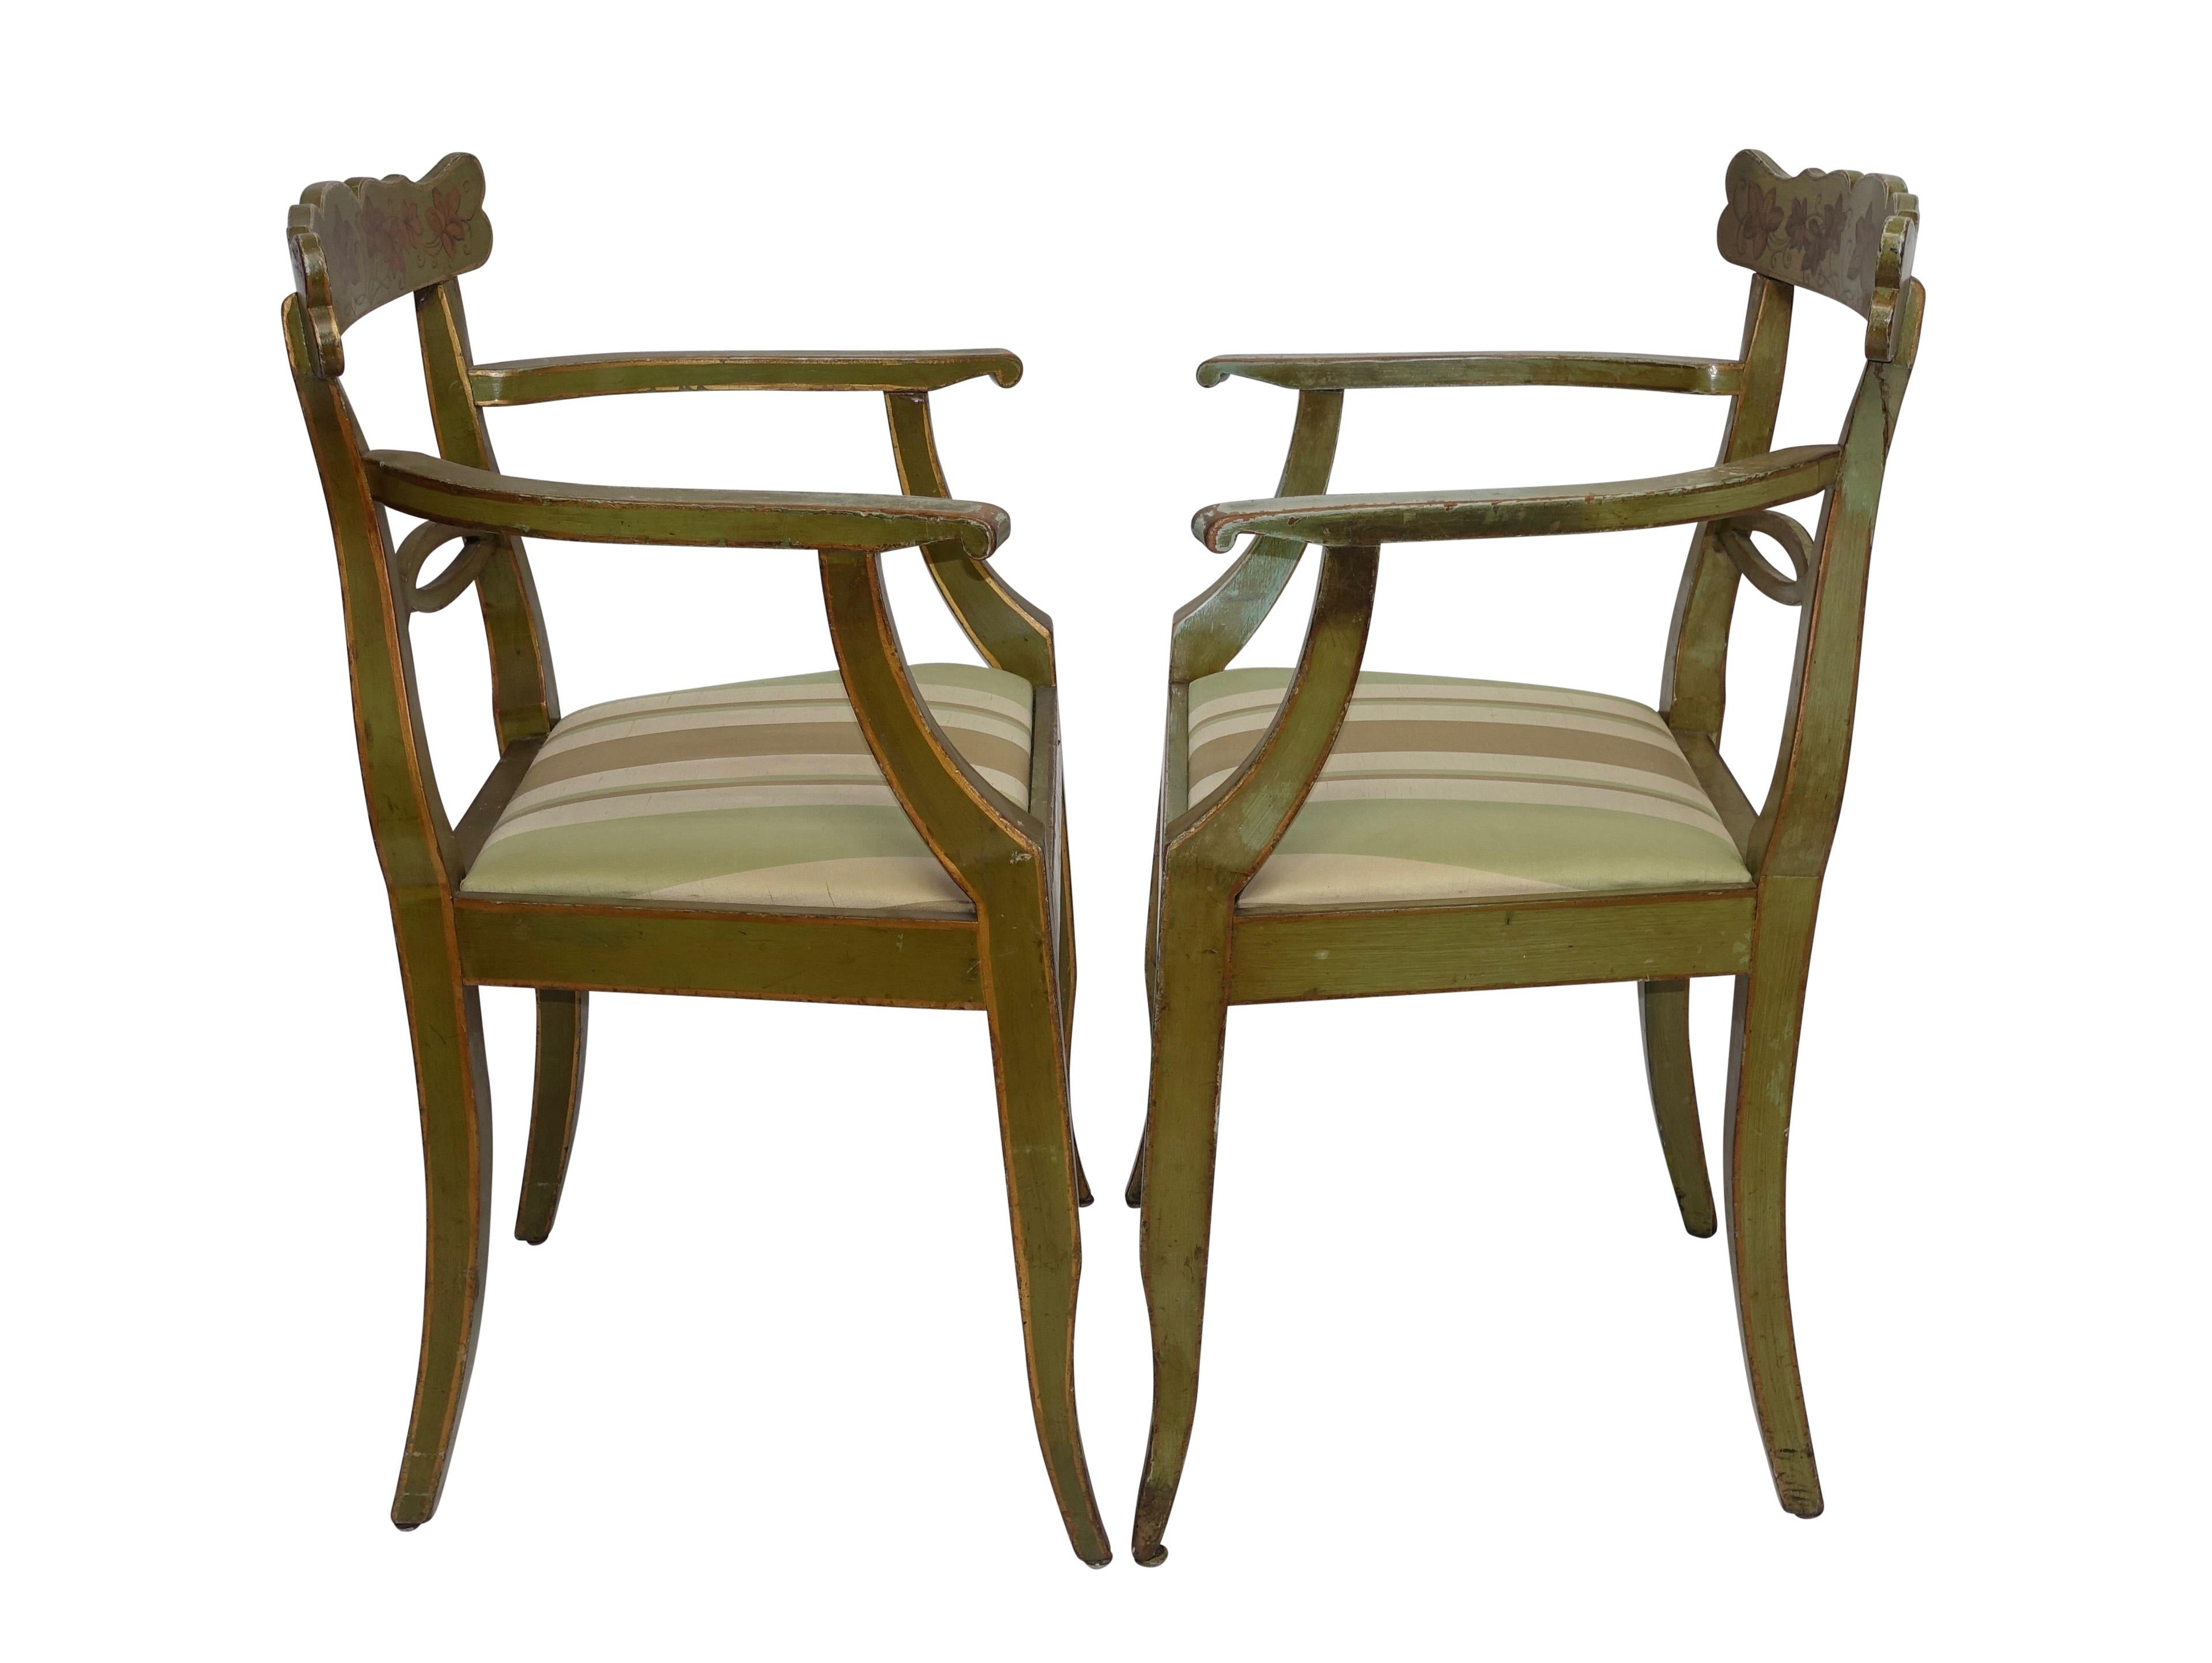 Hand-Painted Four Green Painted Armchairs with Trailing Ivy, Northern European, 19th Century For Sale